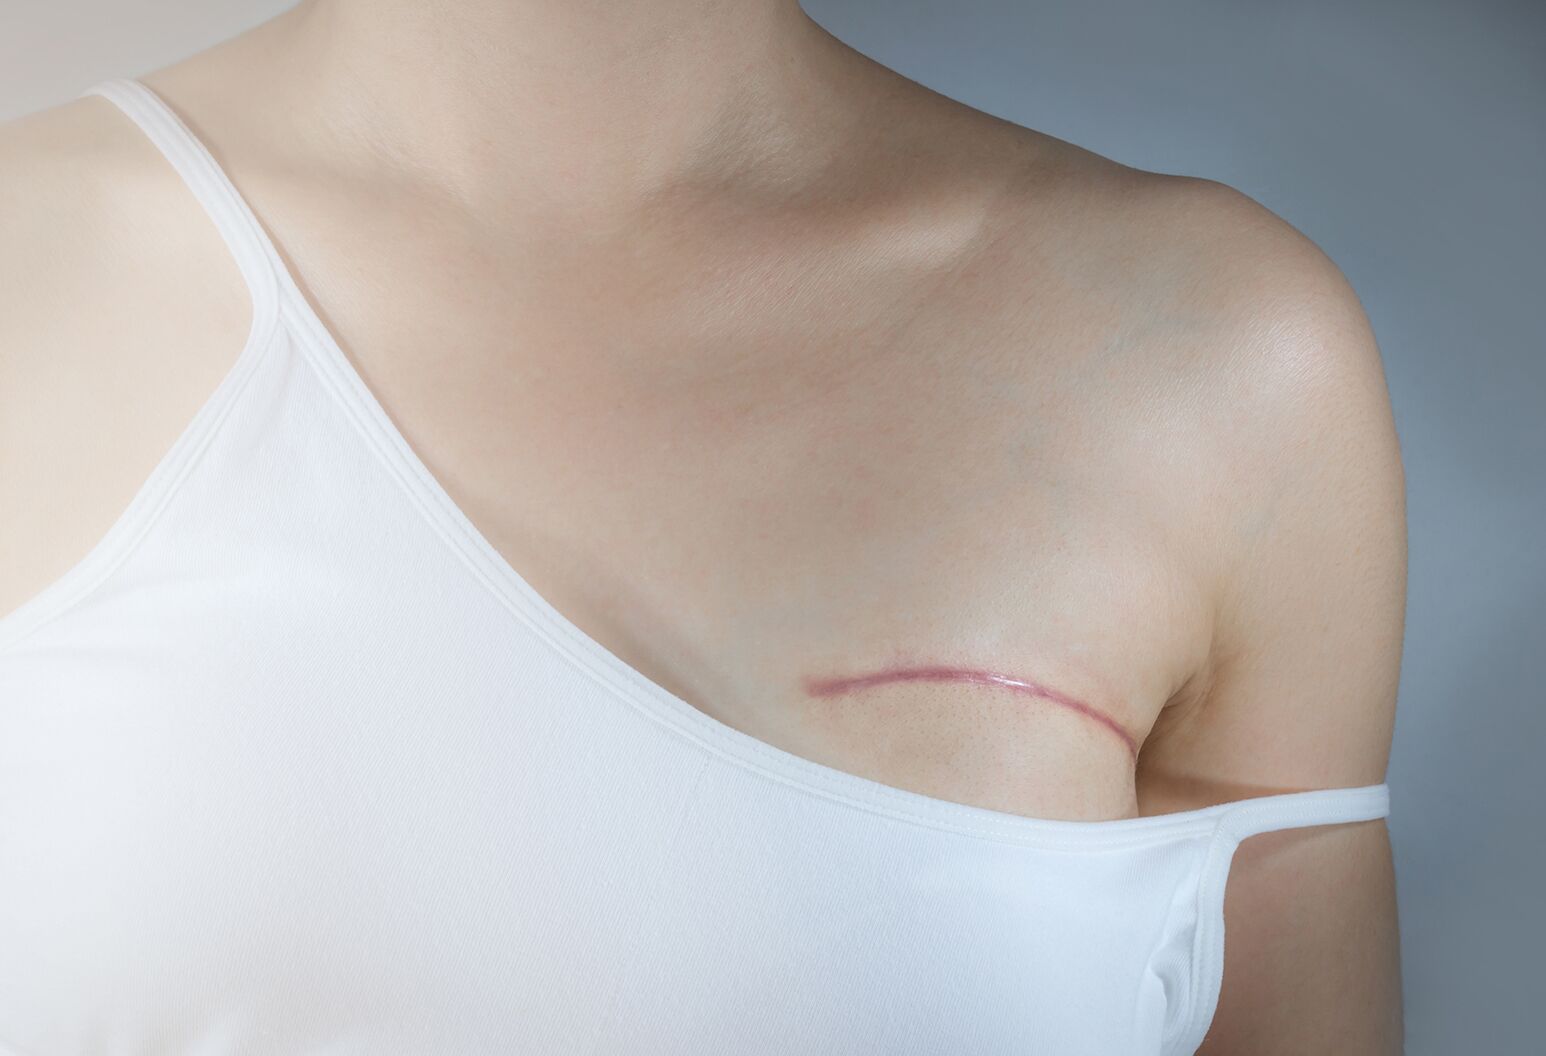 Why I'm happy about having a double mastectomy without